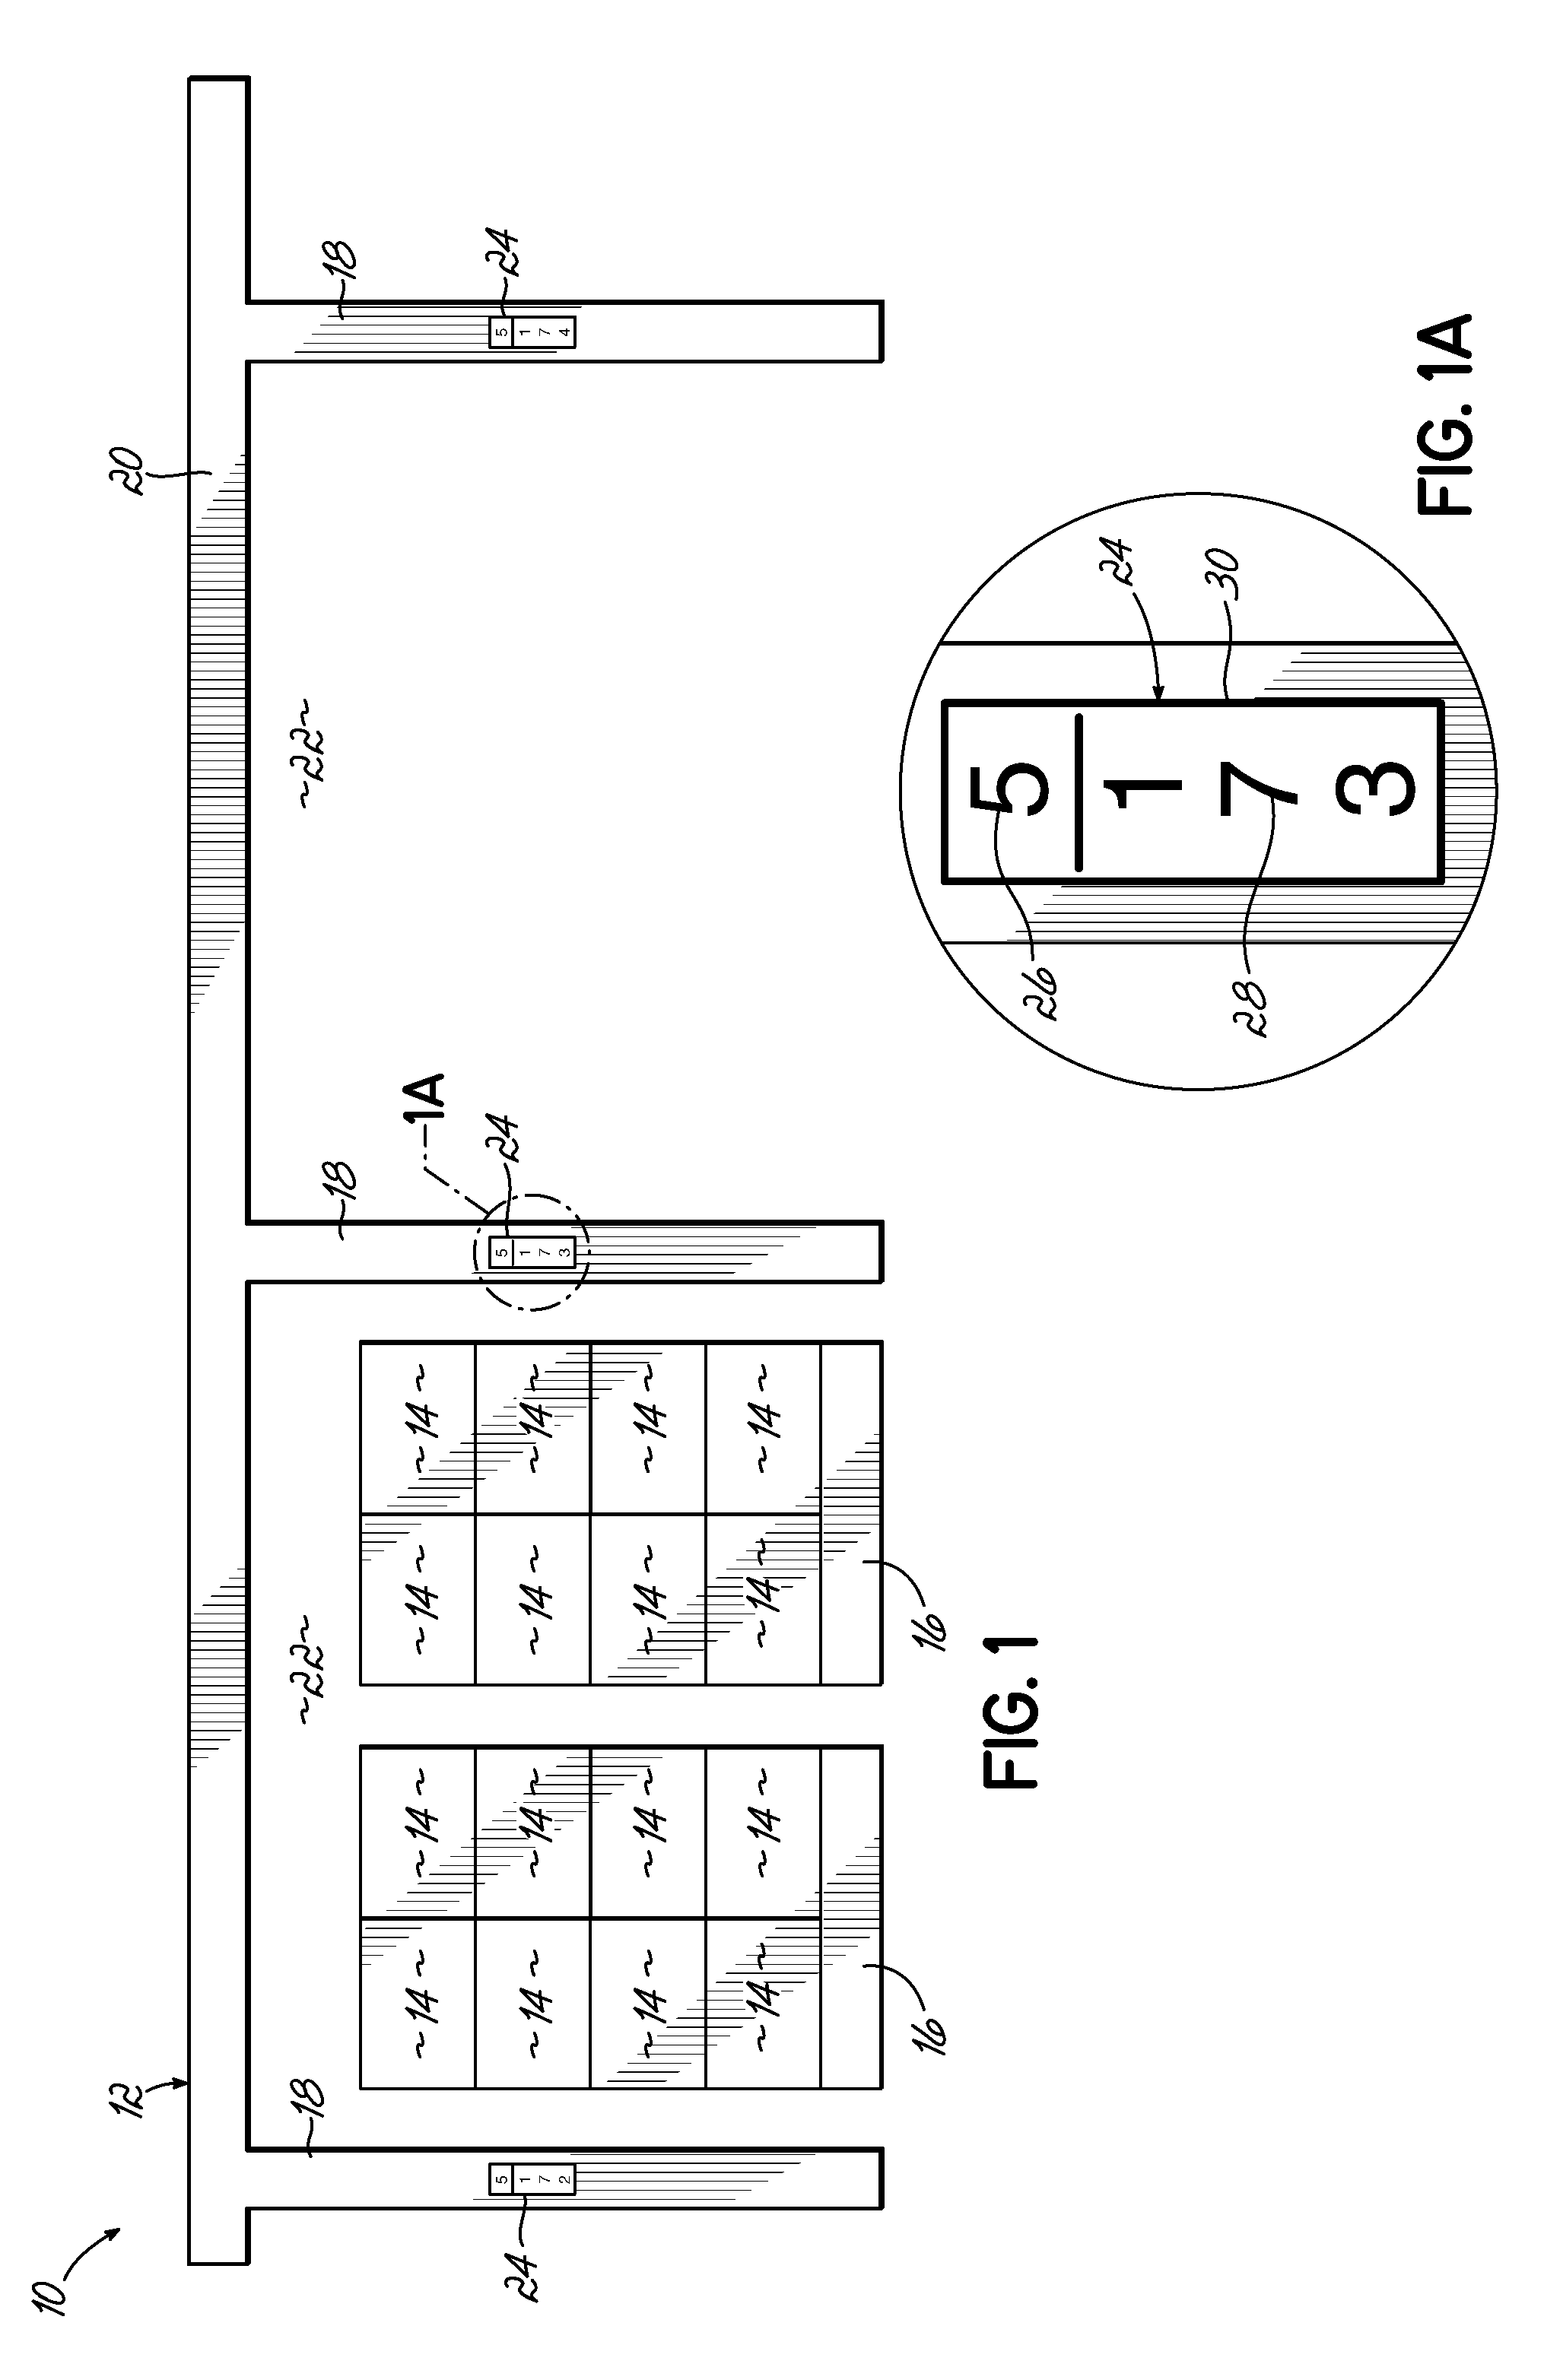 Warehouse vehicle navigation system and method